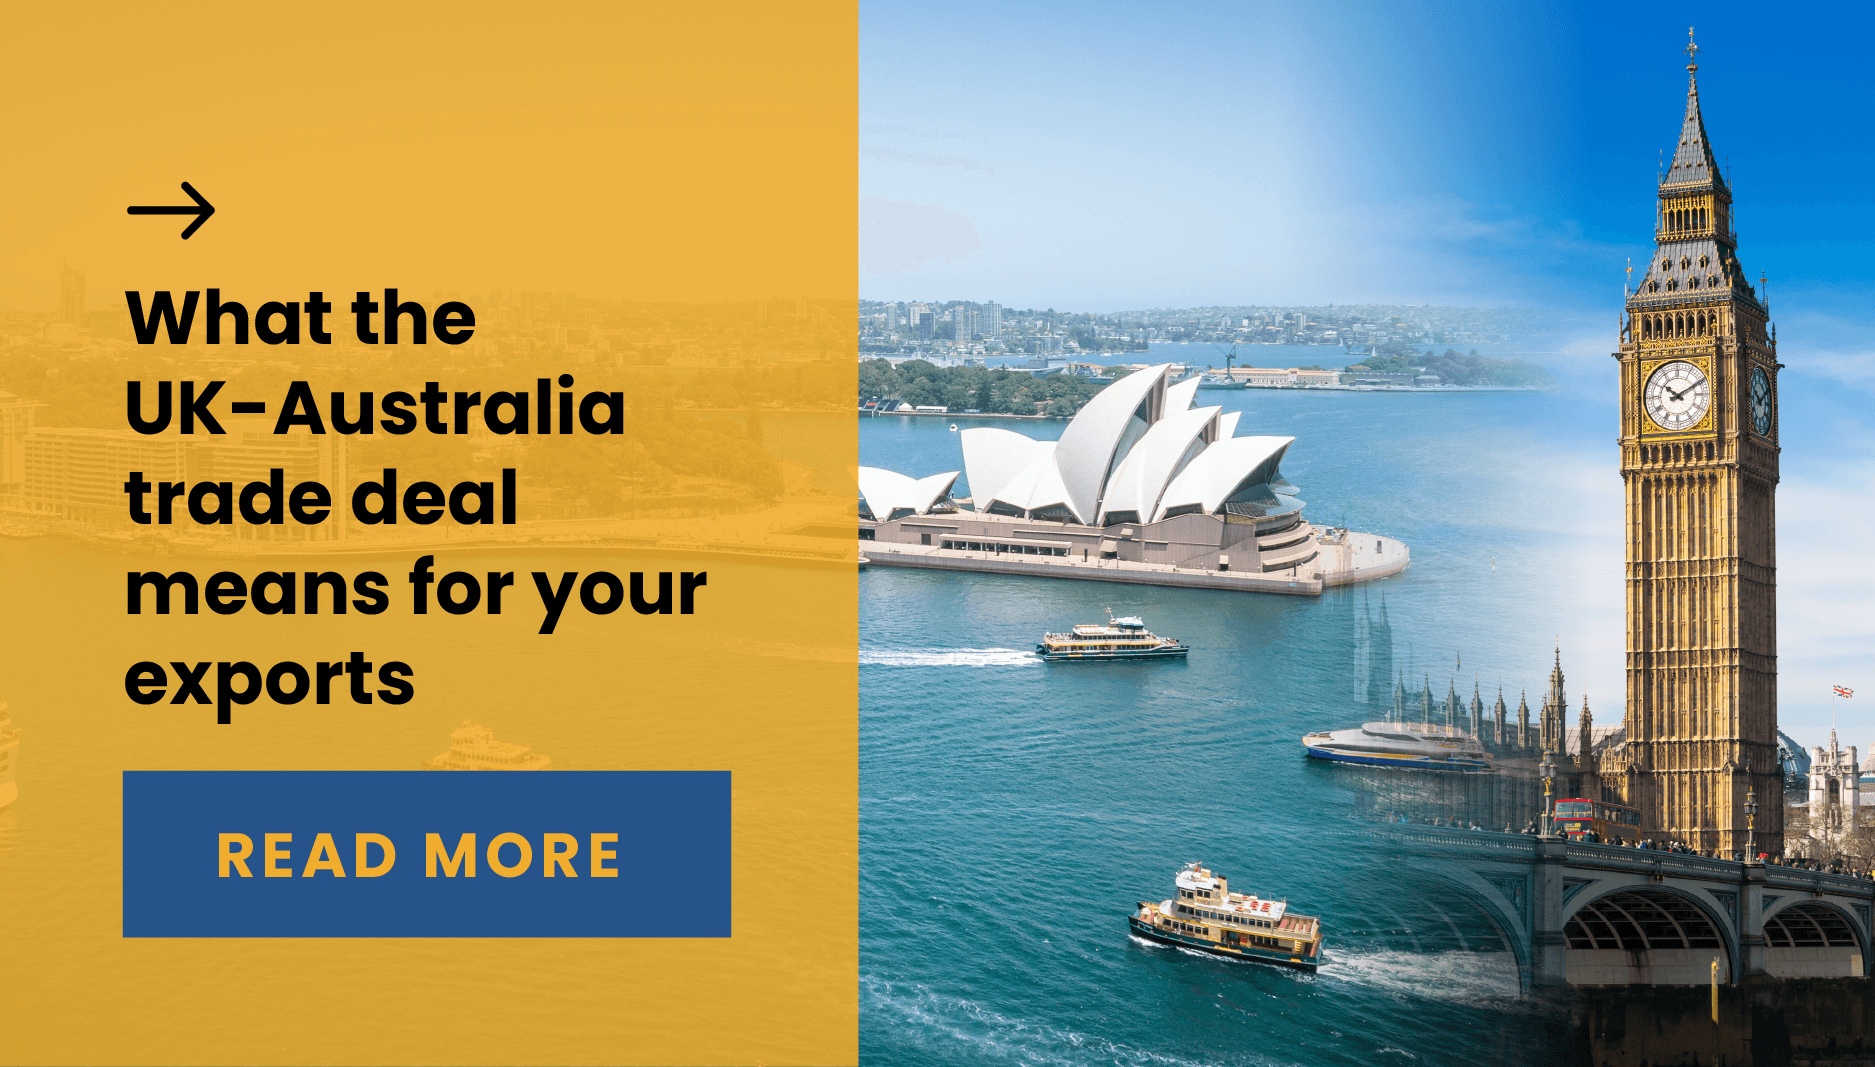 What the UK-Australia trade deal means for your exports